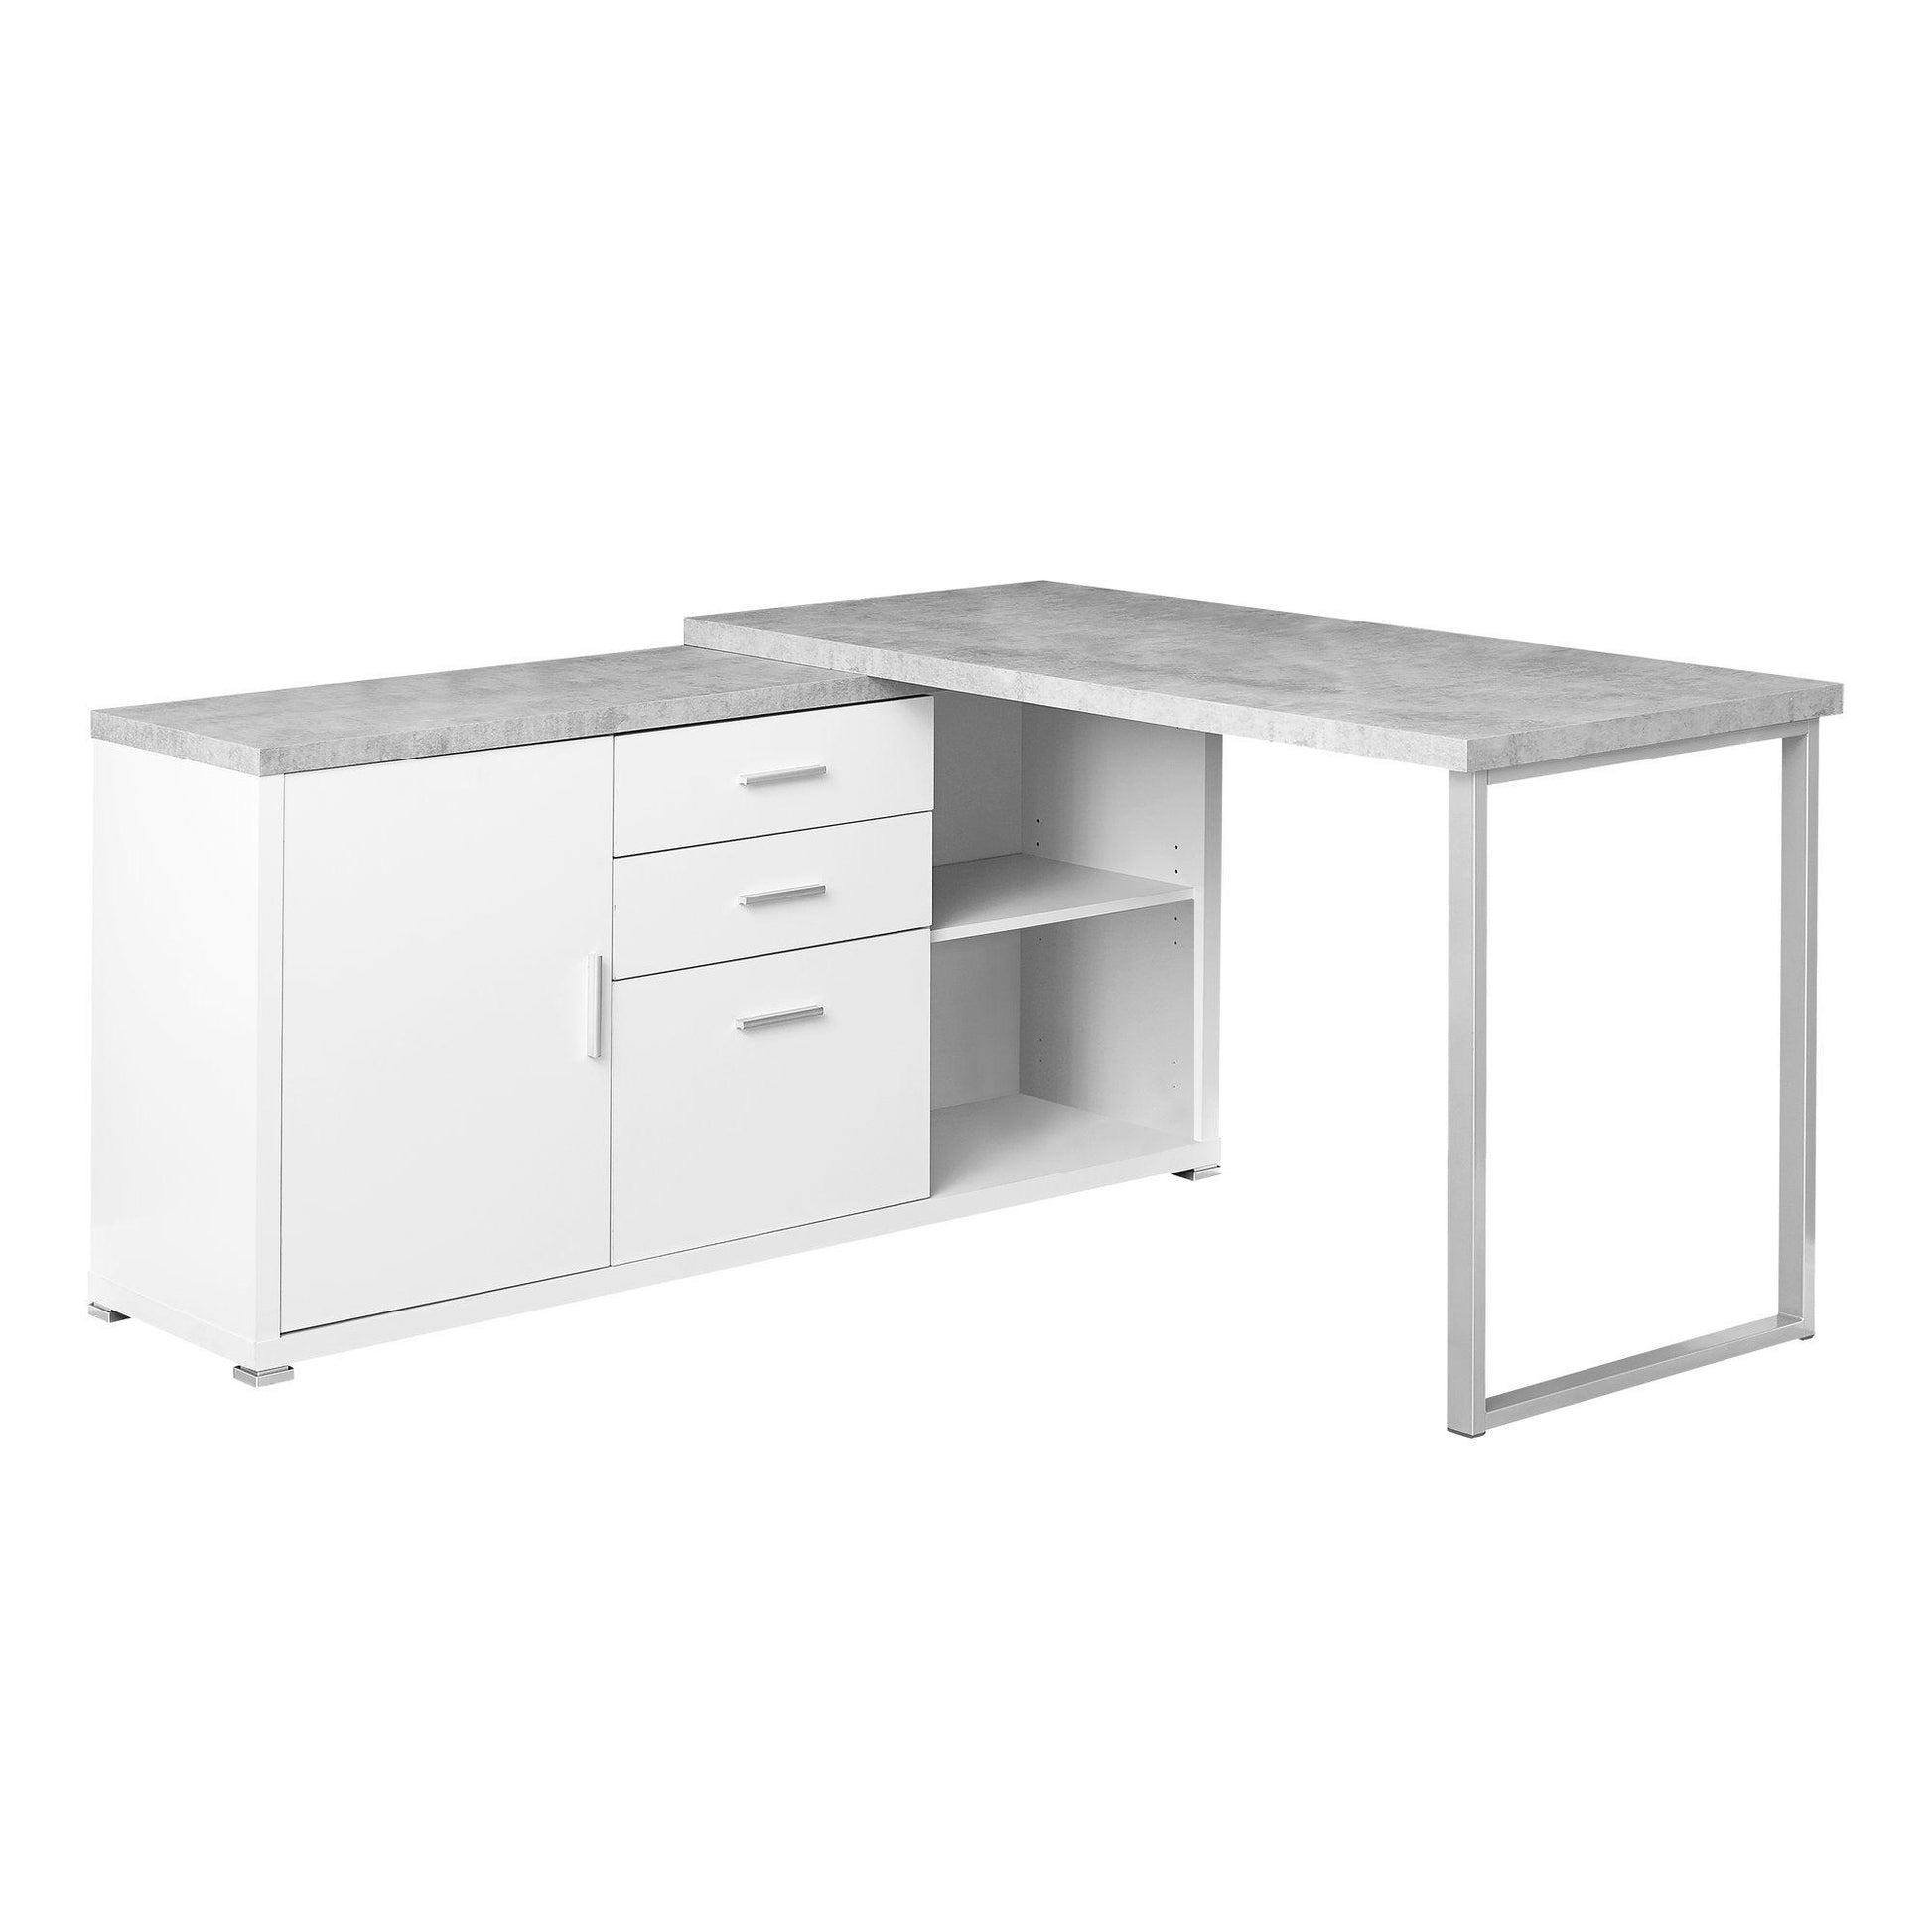 57" x 57" x 29.75" Dark Taupe Silver Particle Board Hollow Core Metal Computer Desk - AFS